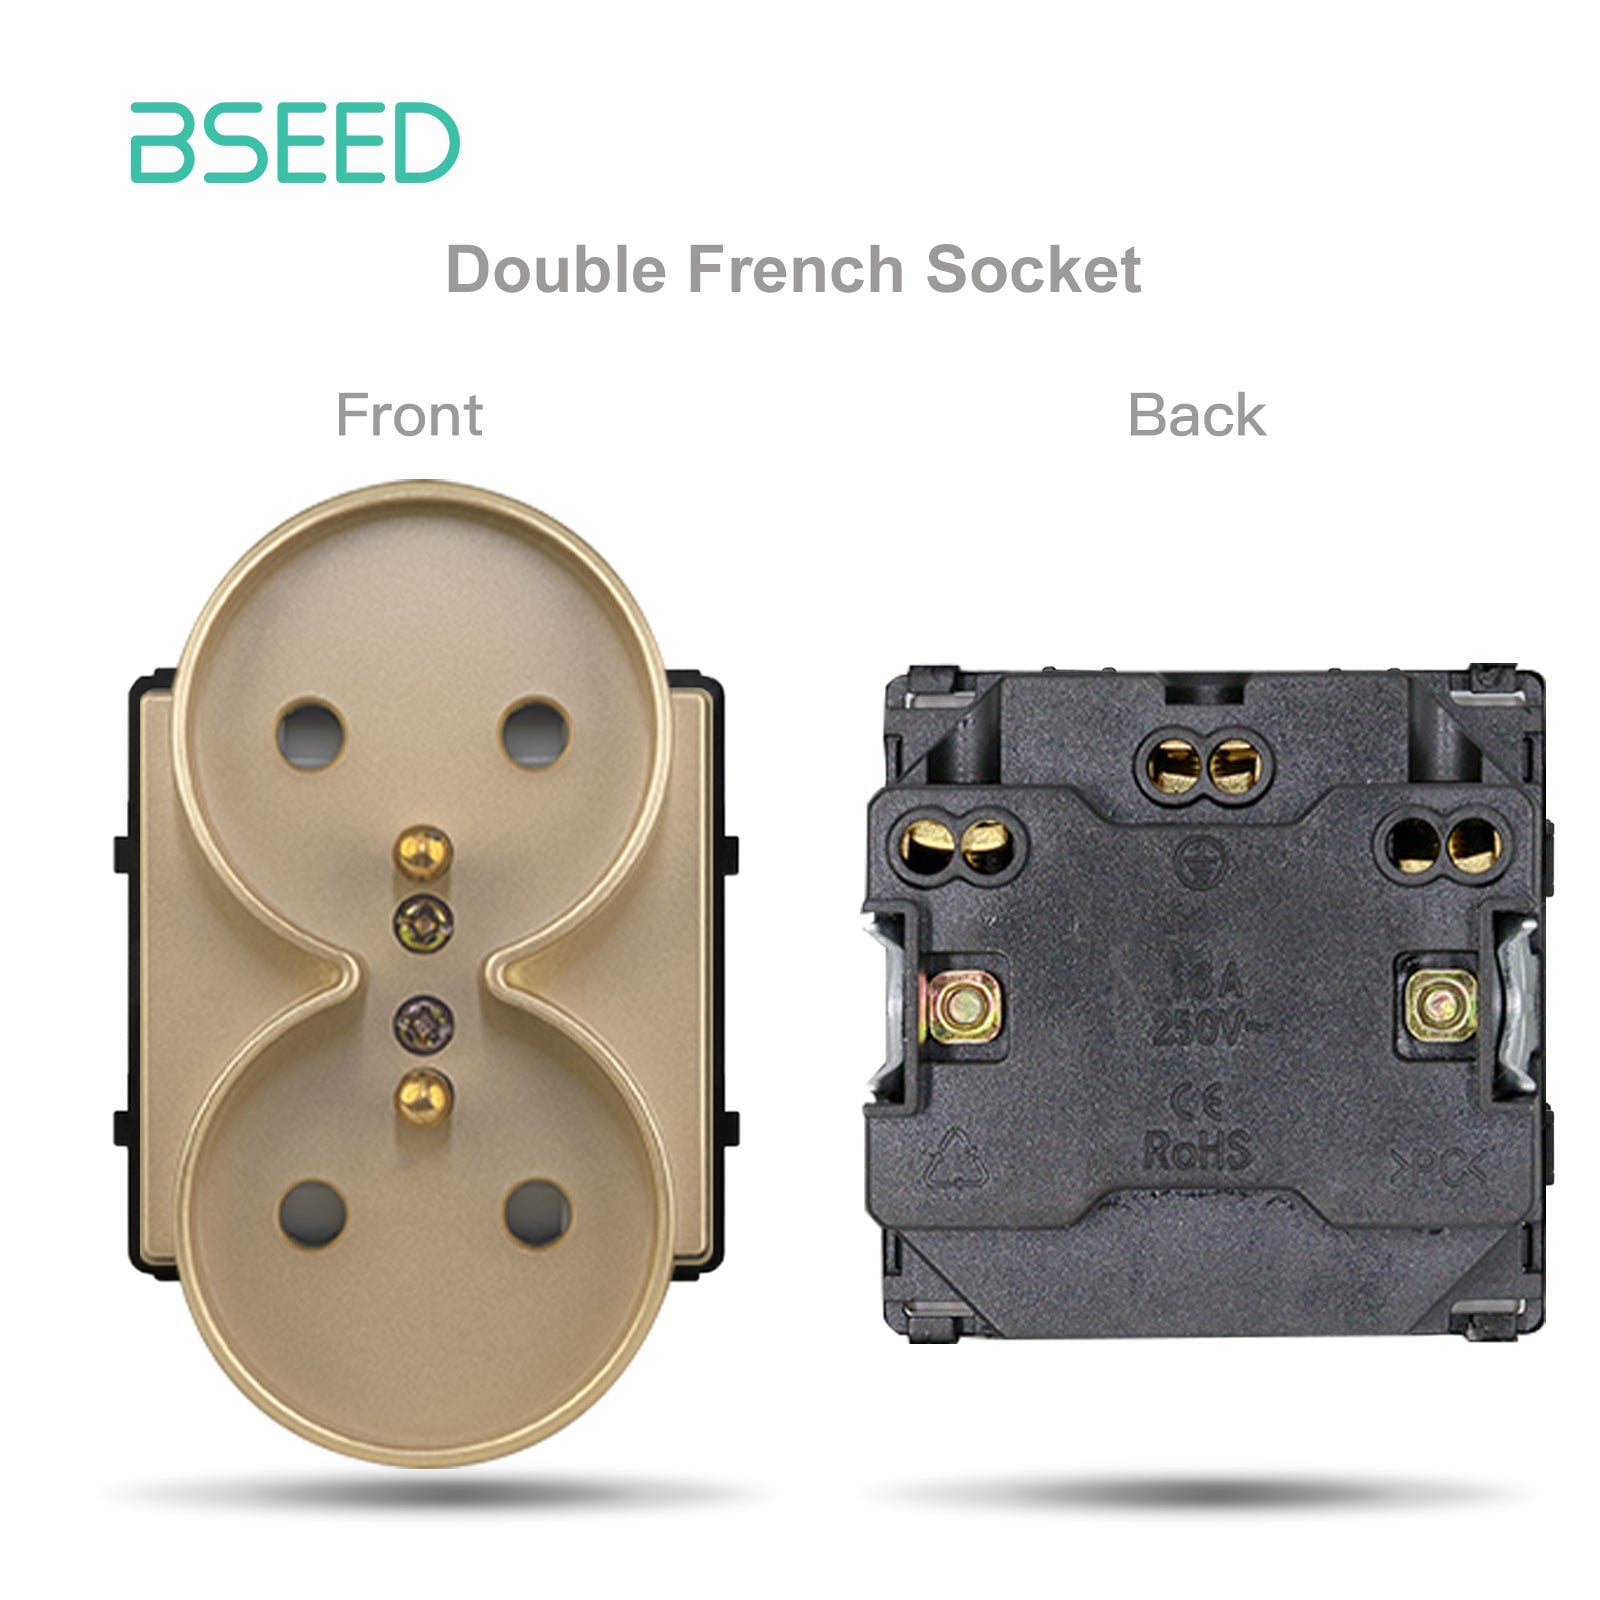 BSEED EU/FR Standard double Wall Socket Function Key without panel DIY part Power Outlets & Sockets Bseedswitch Gold FR 